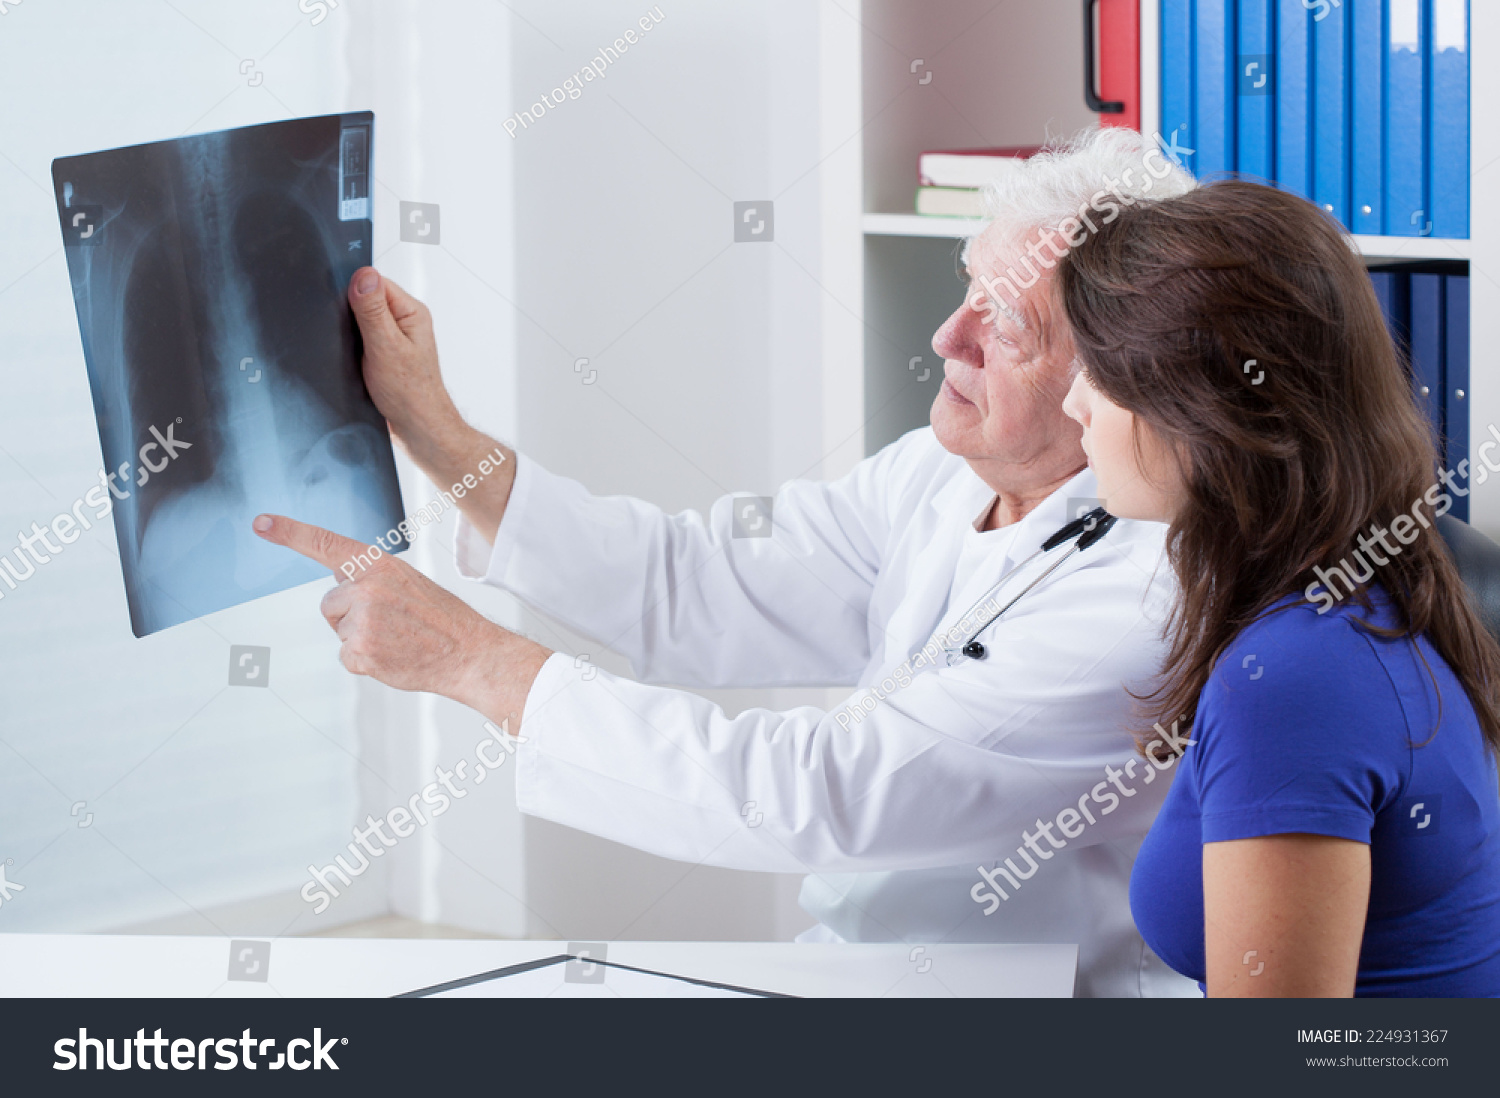 Experienced doctor analyzing x-ray of the lungs #224931367